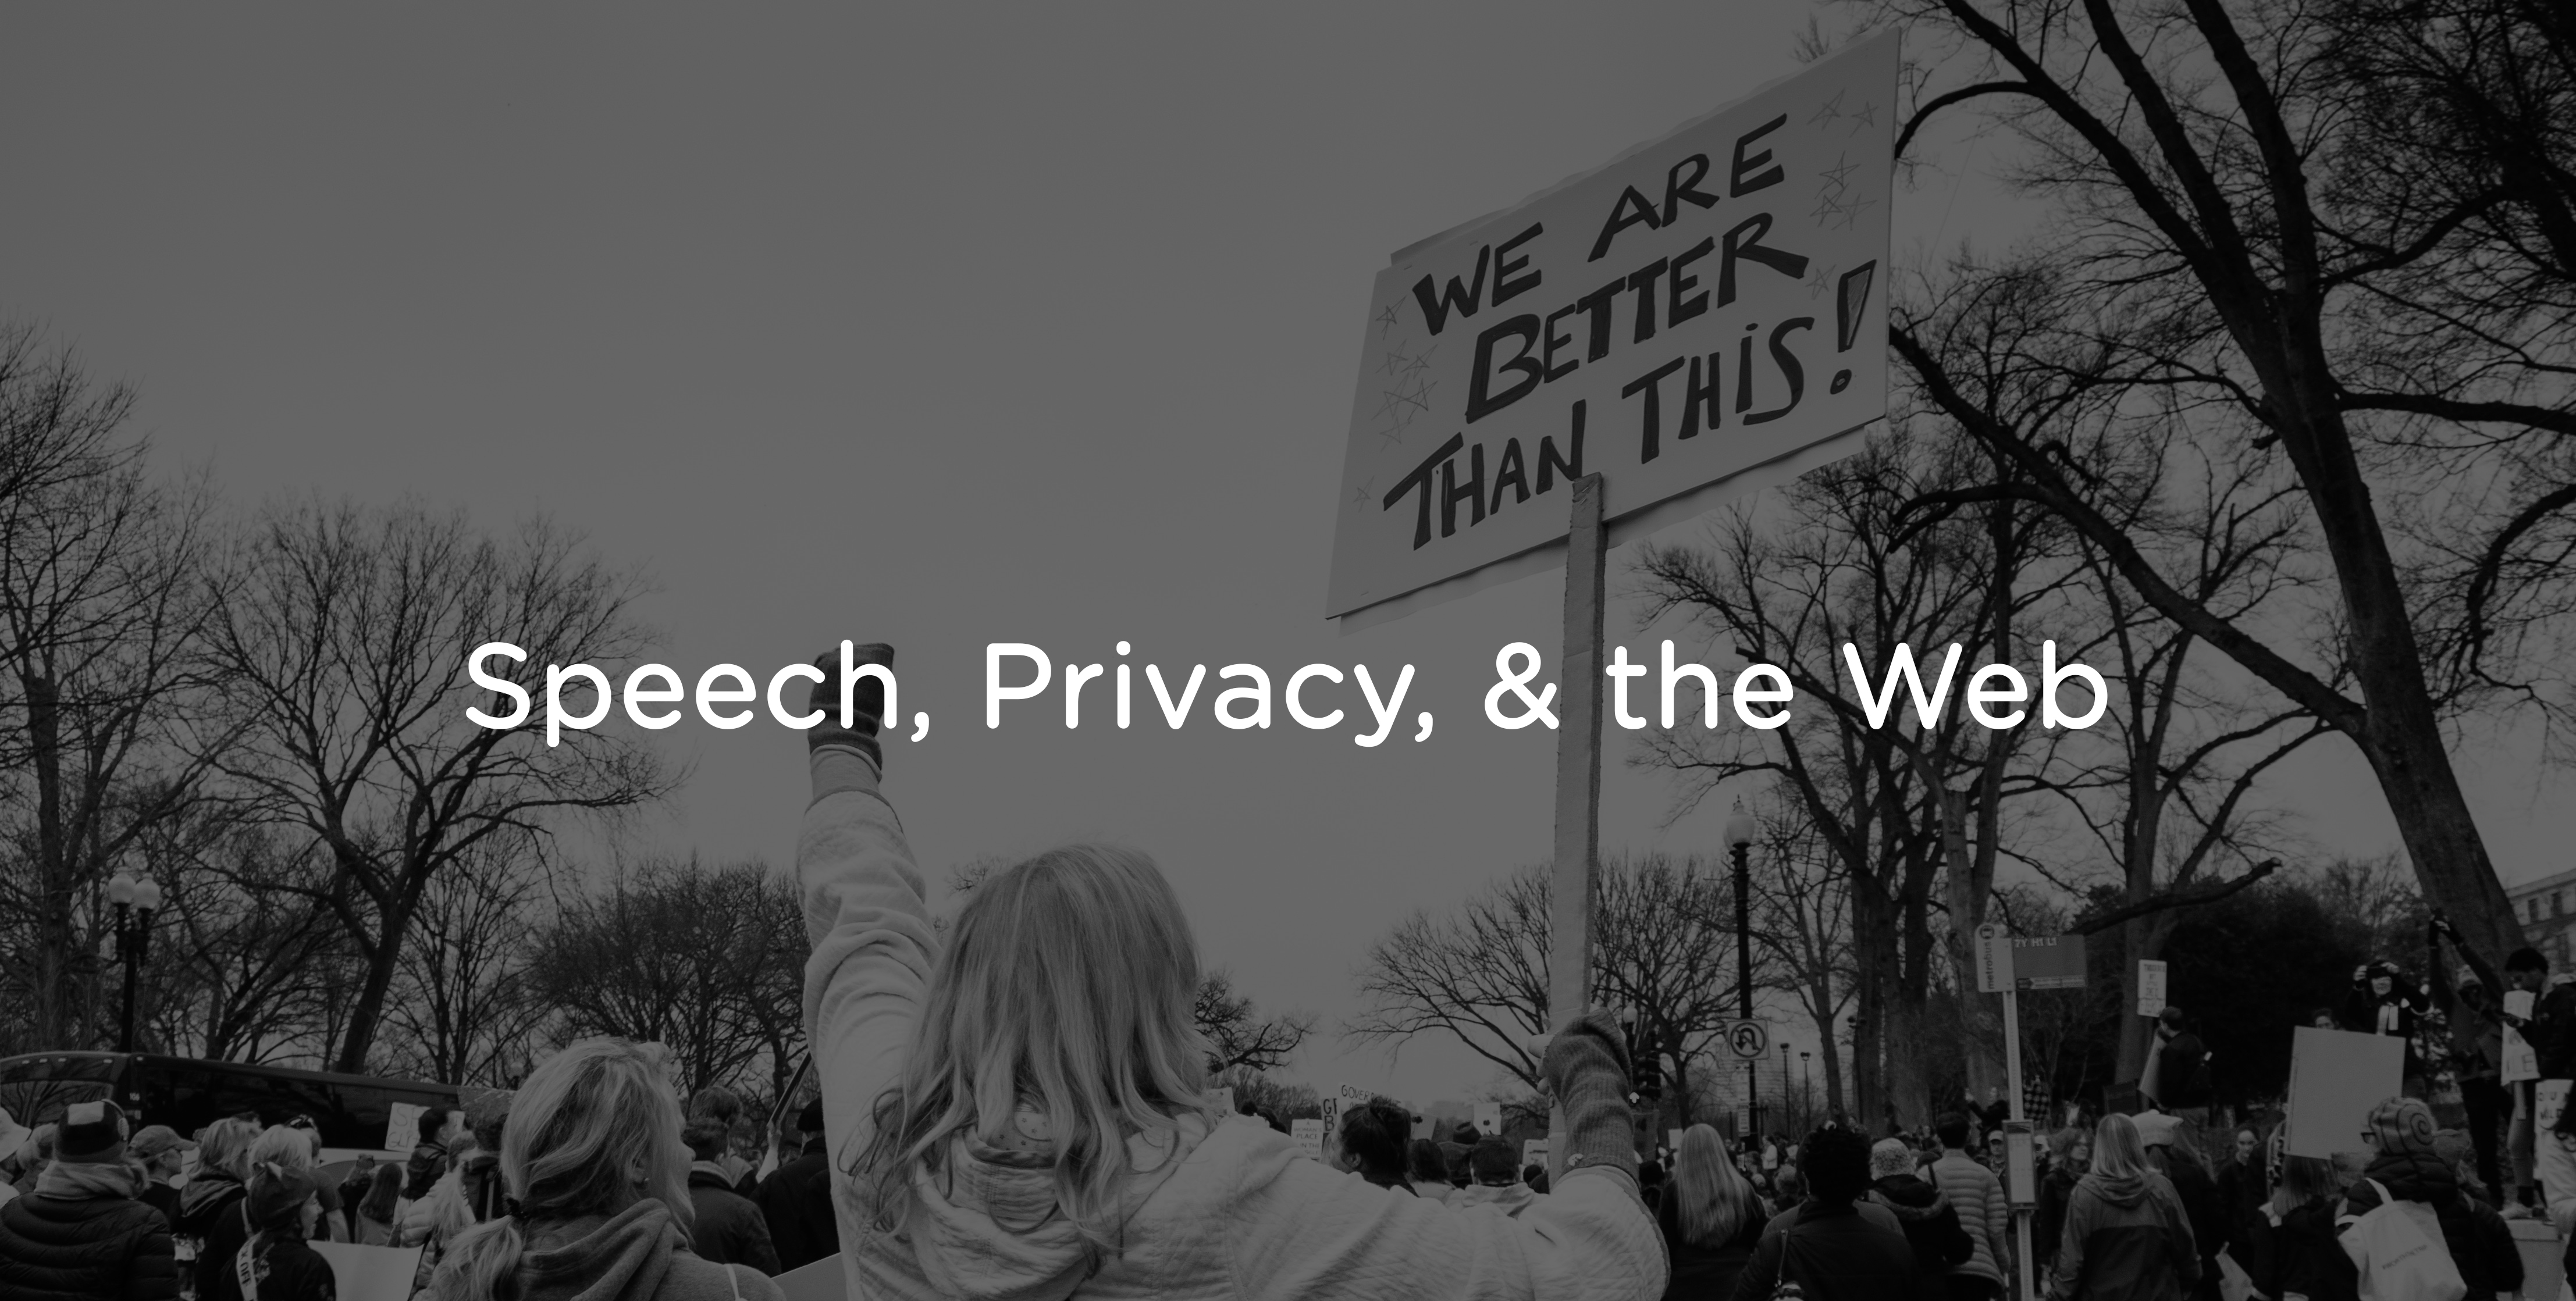 Free speech, privacy, and the web